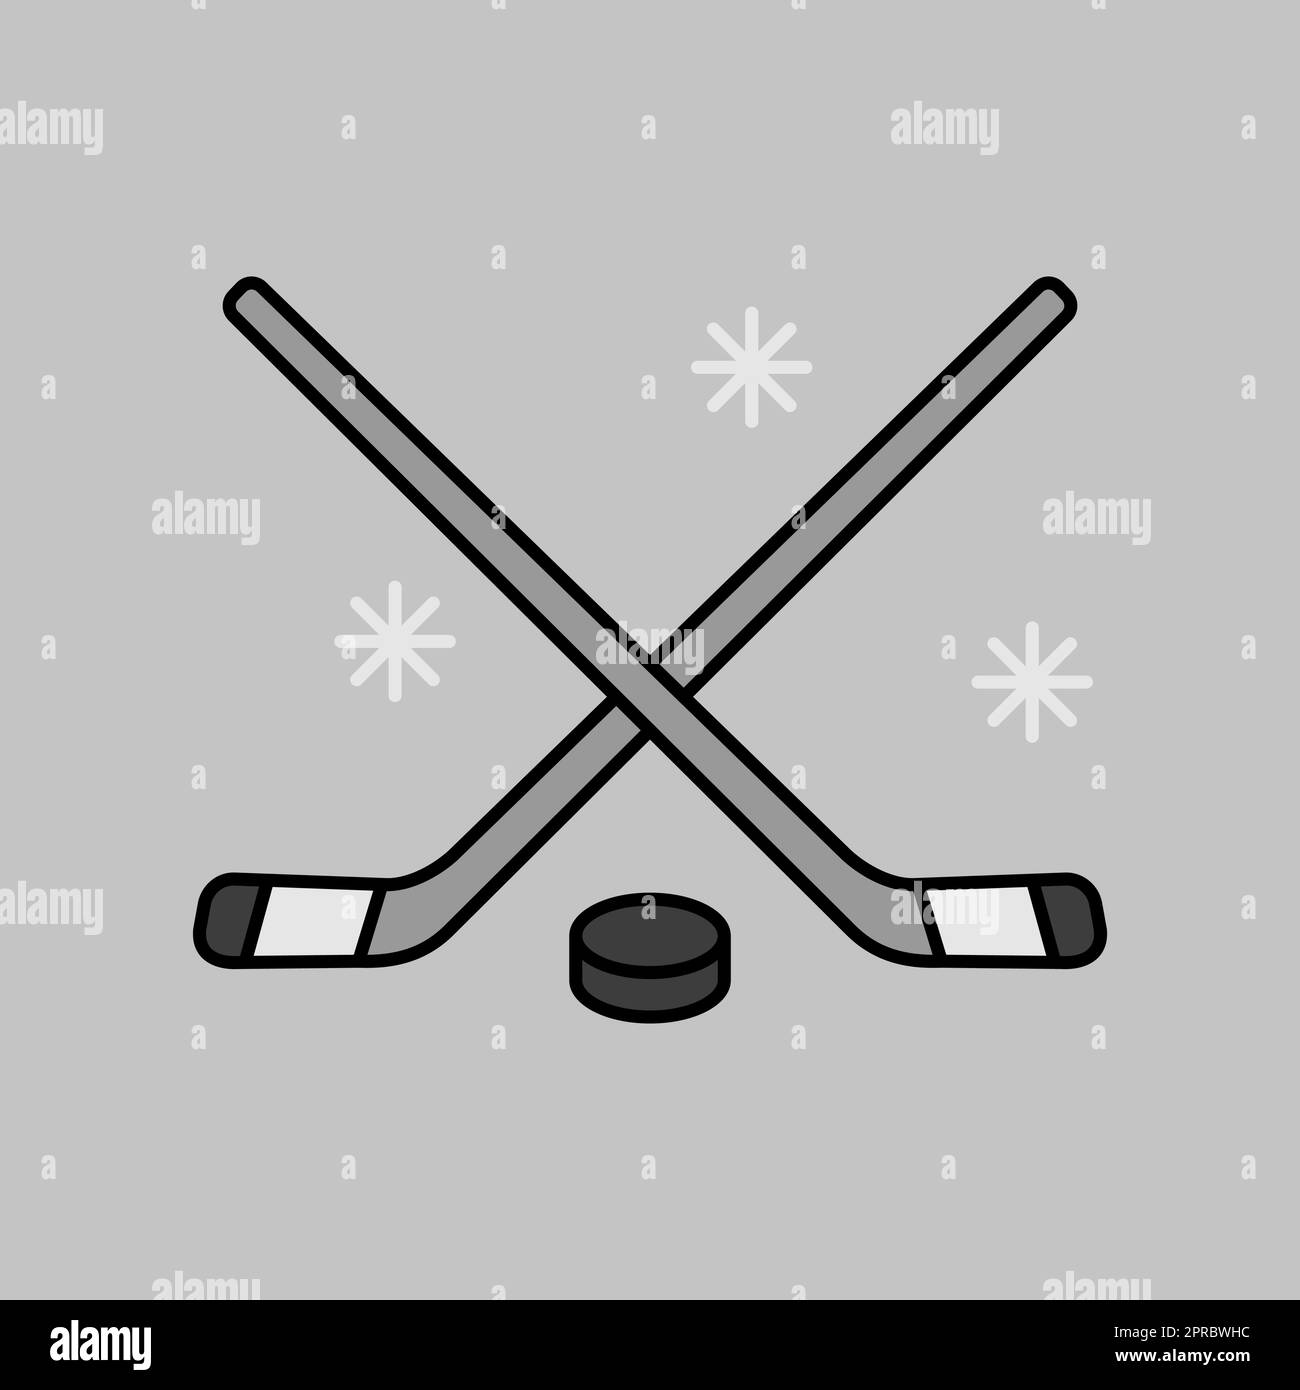 Black hockey stick and disc icon, National Hockey League Hockey Sticks Ice  hockey Hockey puck Field hockey, stick, angle, sport png